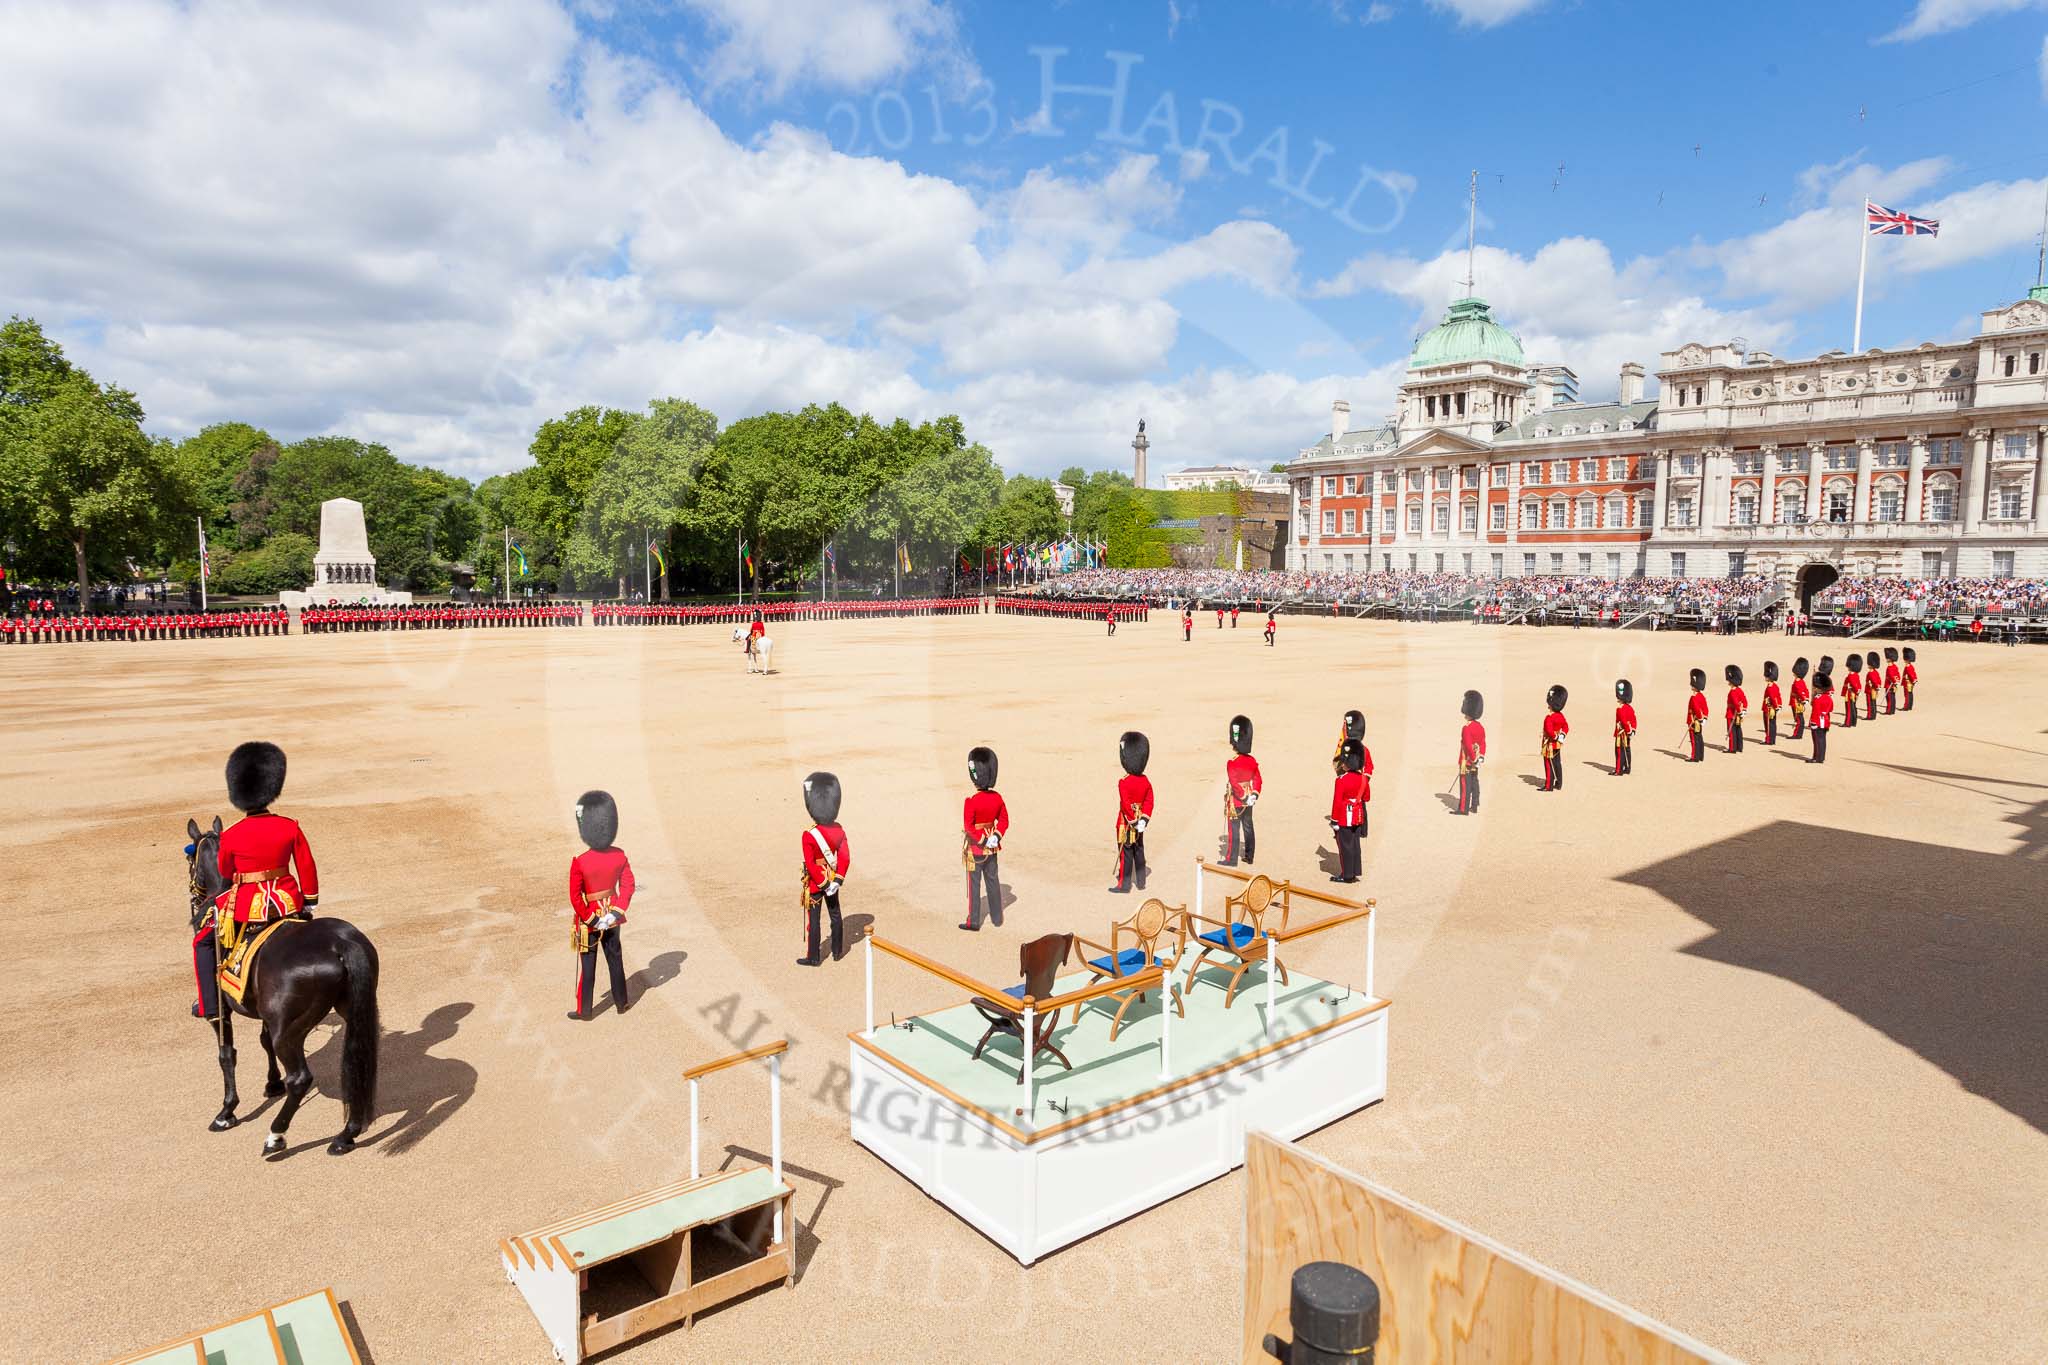 The Colonel's Review 2015.
Horse Guards Parade, Westminster,
London,

United Kingdom,
on 06 June 2015 at 10:38, image #122